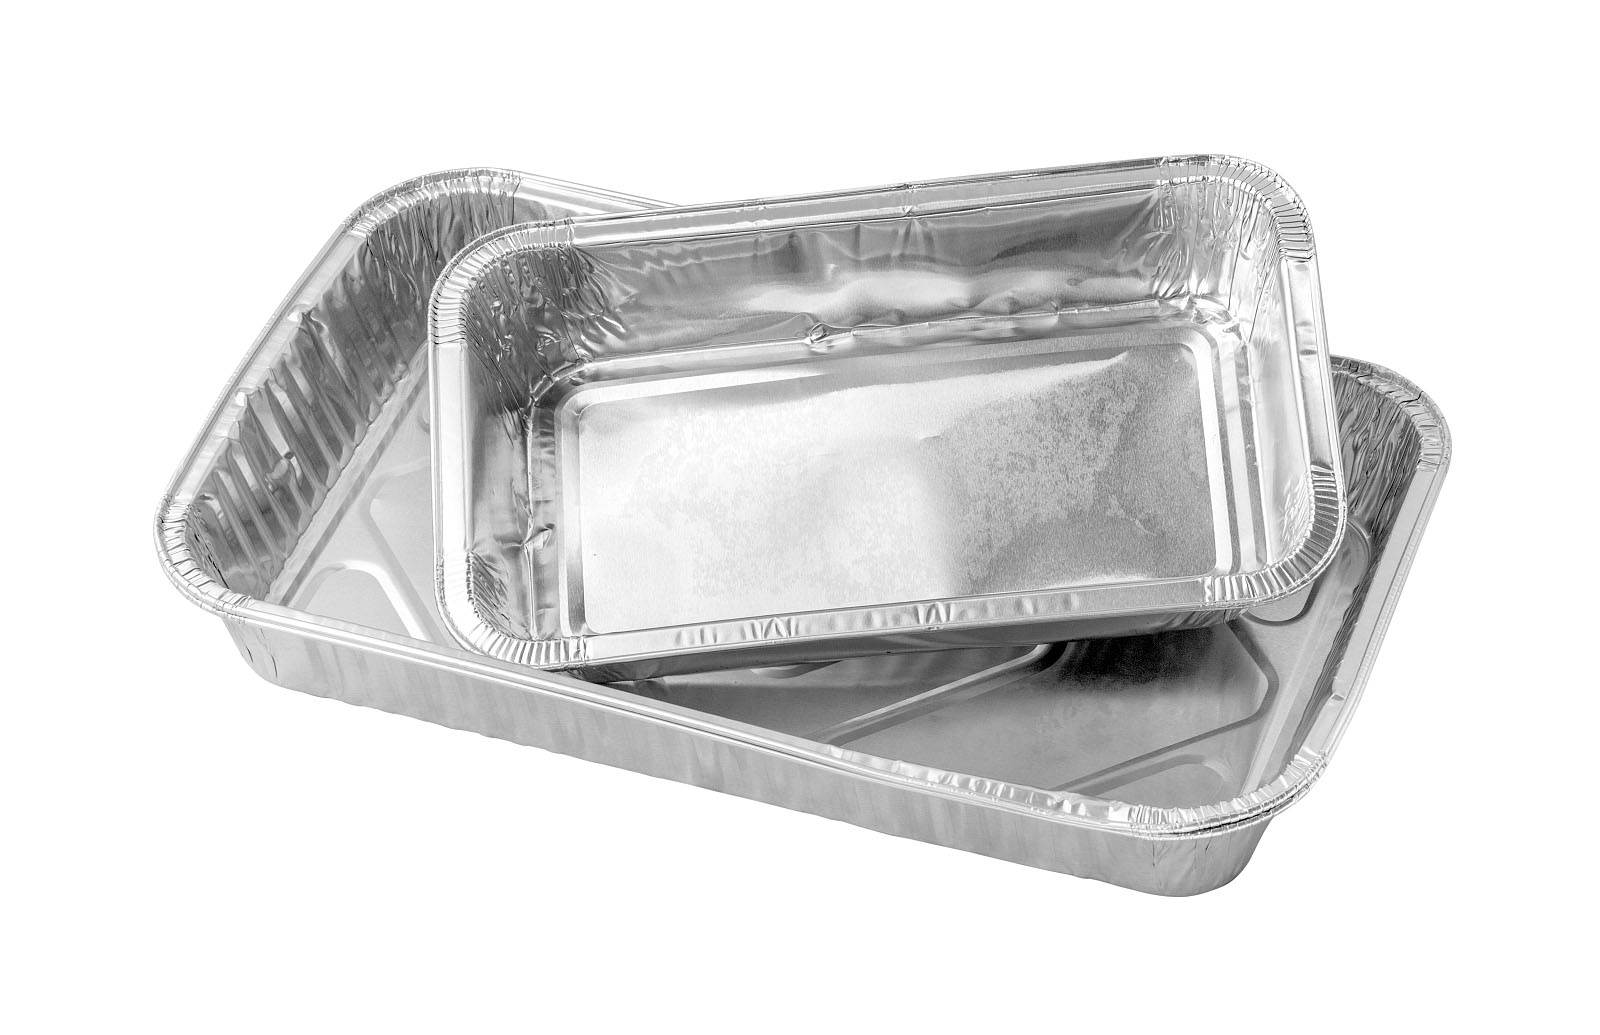  MESTAEK 10 Sturdy Aluminum Foil Pans with Lids (5 Pack), 2X  Thicker Heavy Duty Reusable Foil Tin for Cooking Baking: Home & Kitchen